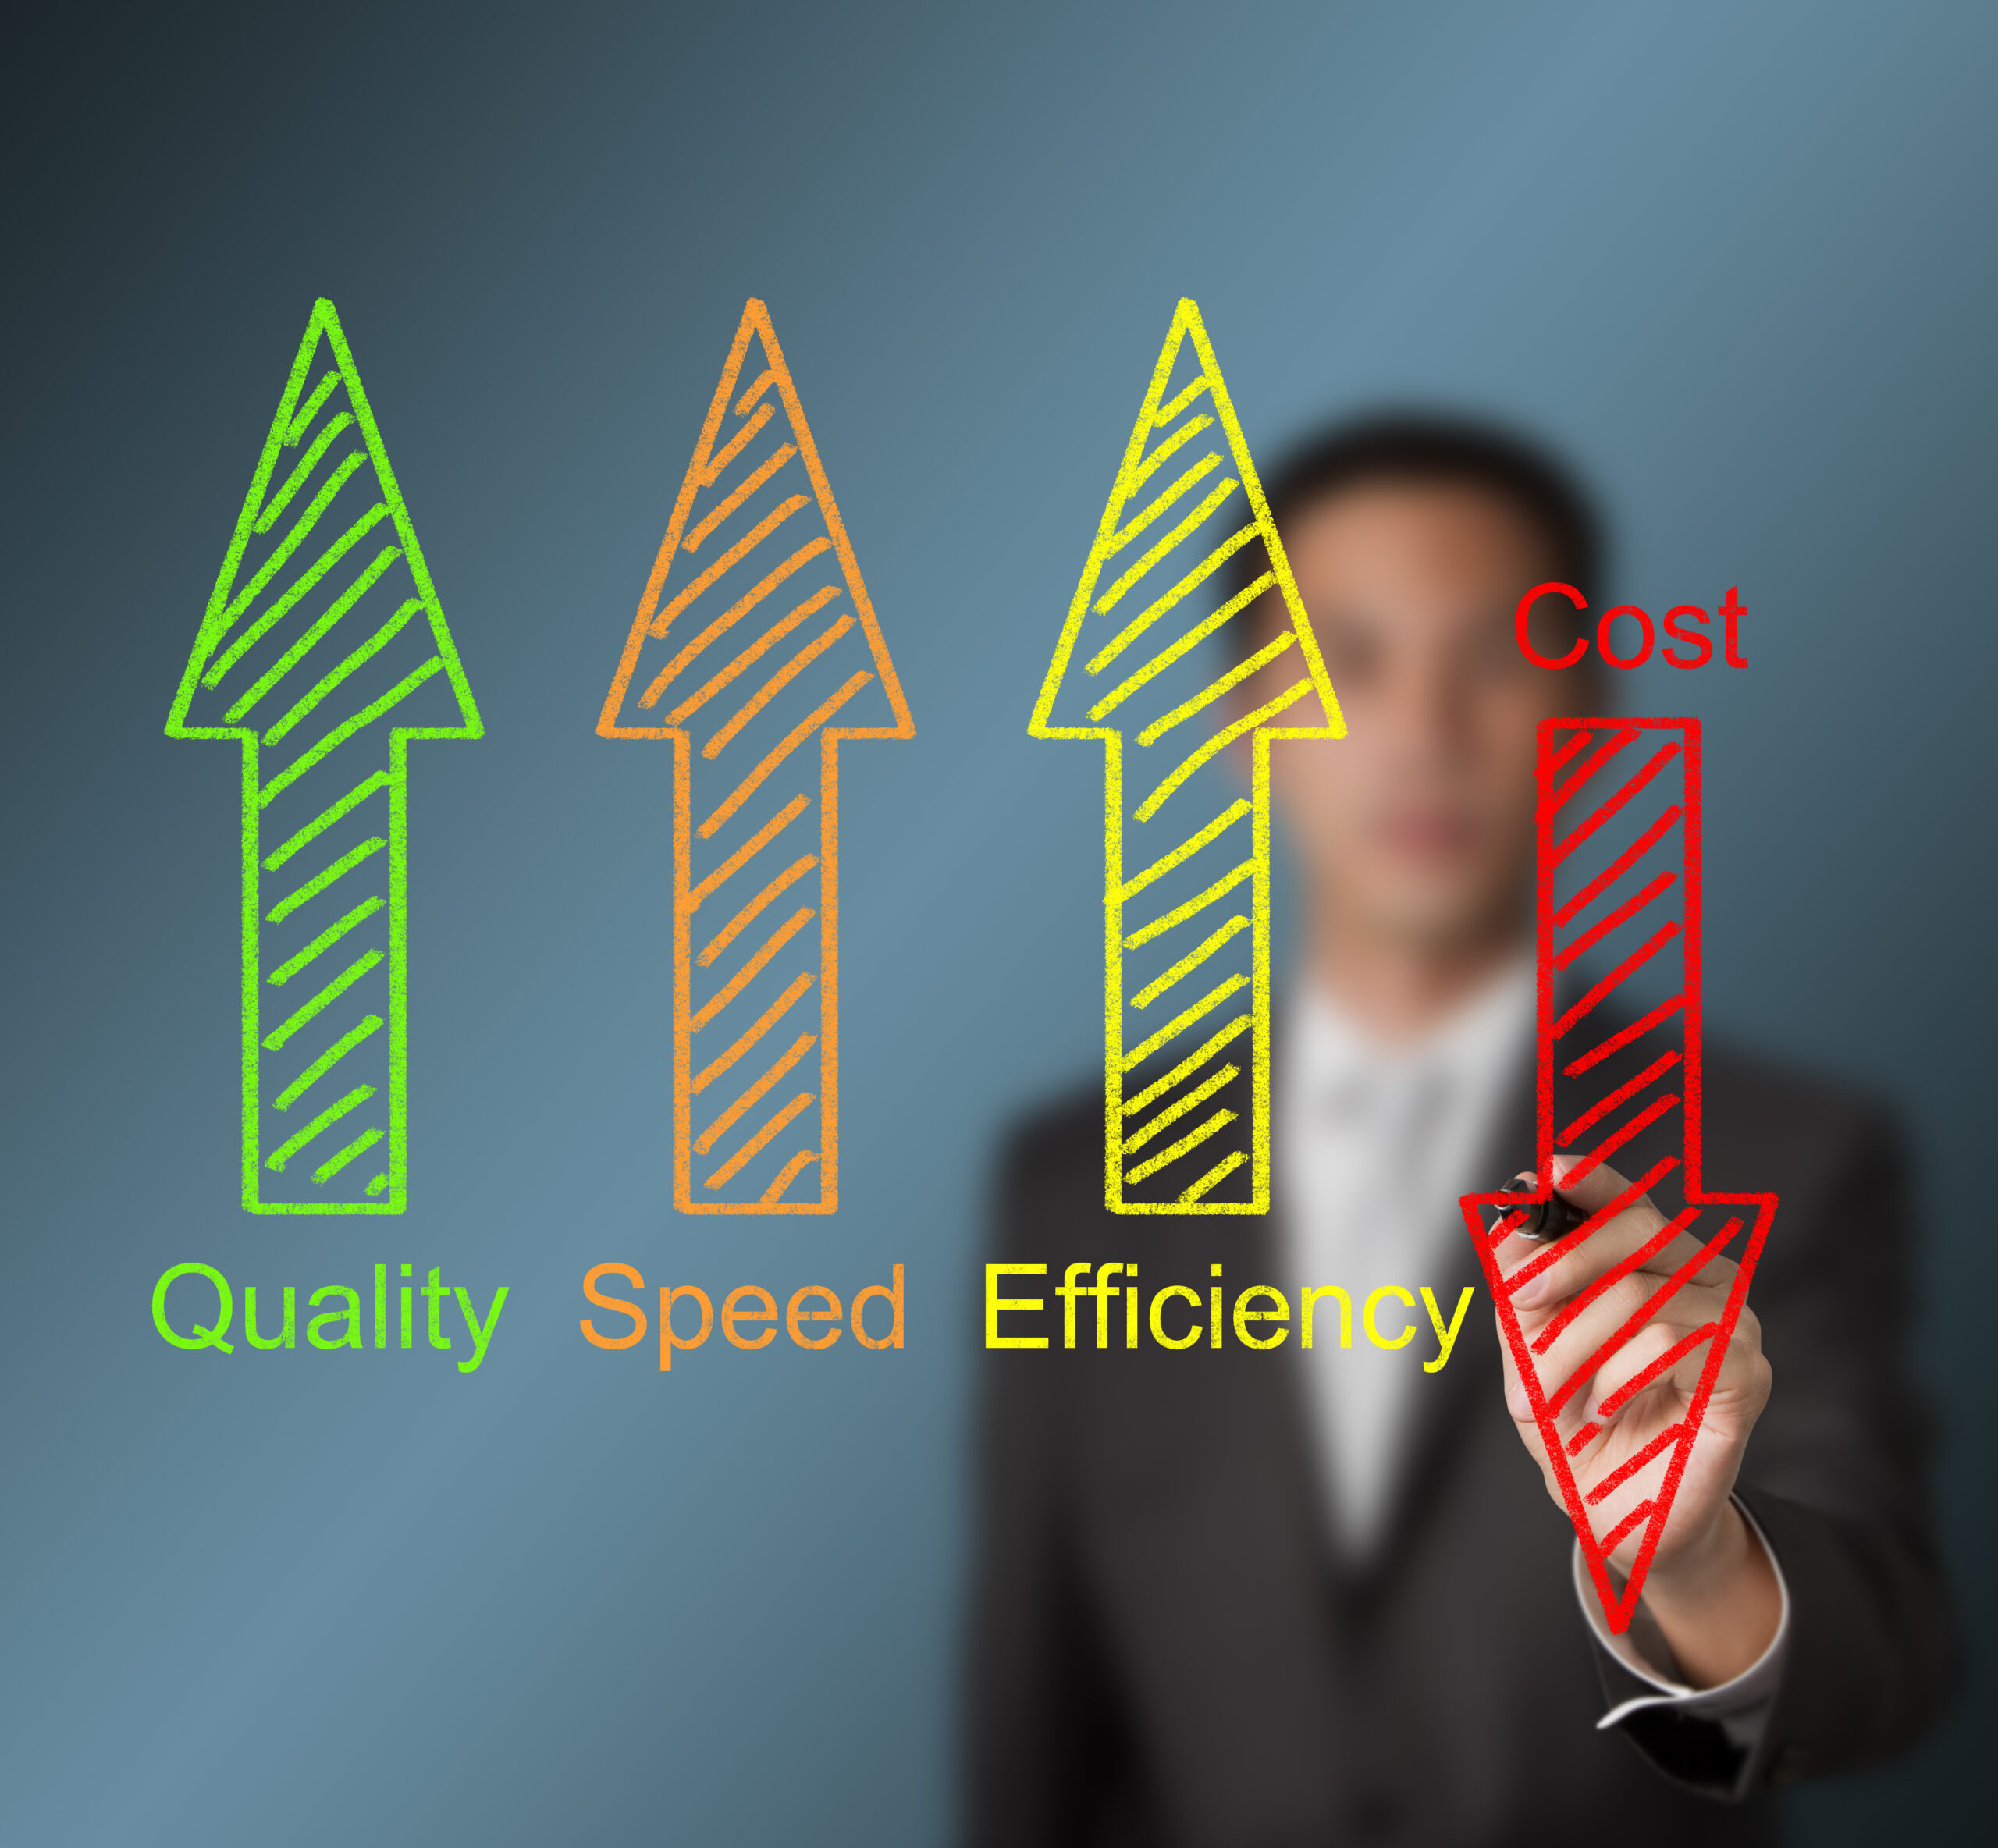 Cost-savings-business-man-writing-industrial-product-and-service-improvement-concept-of-increased-quality-speed-efficiency-and-reduced-co